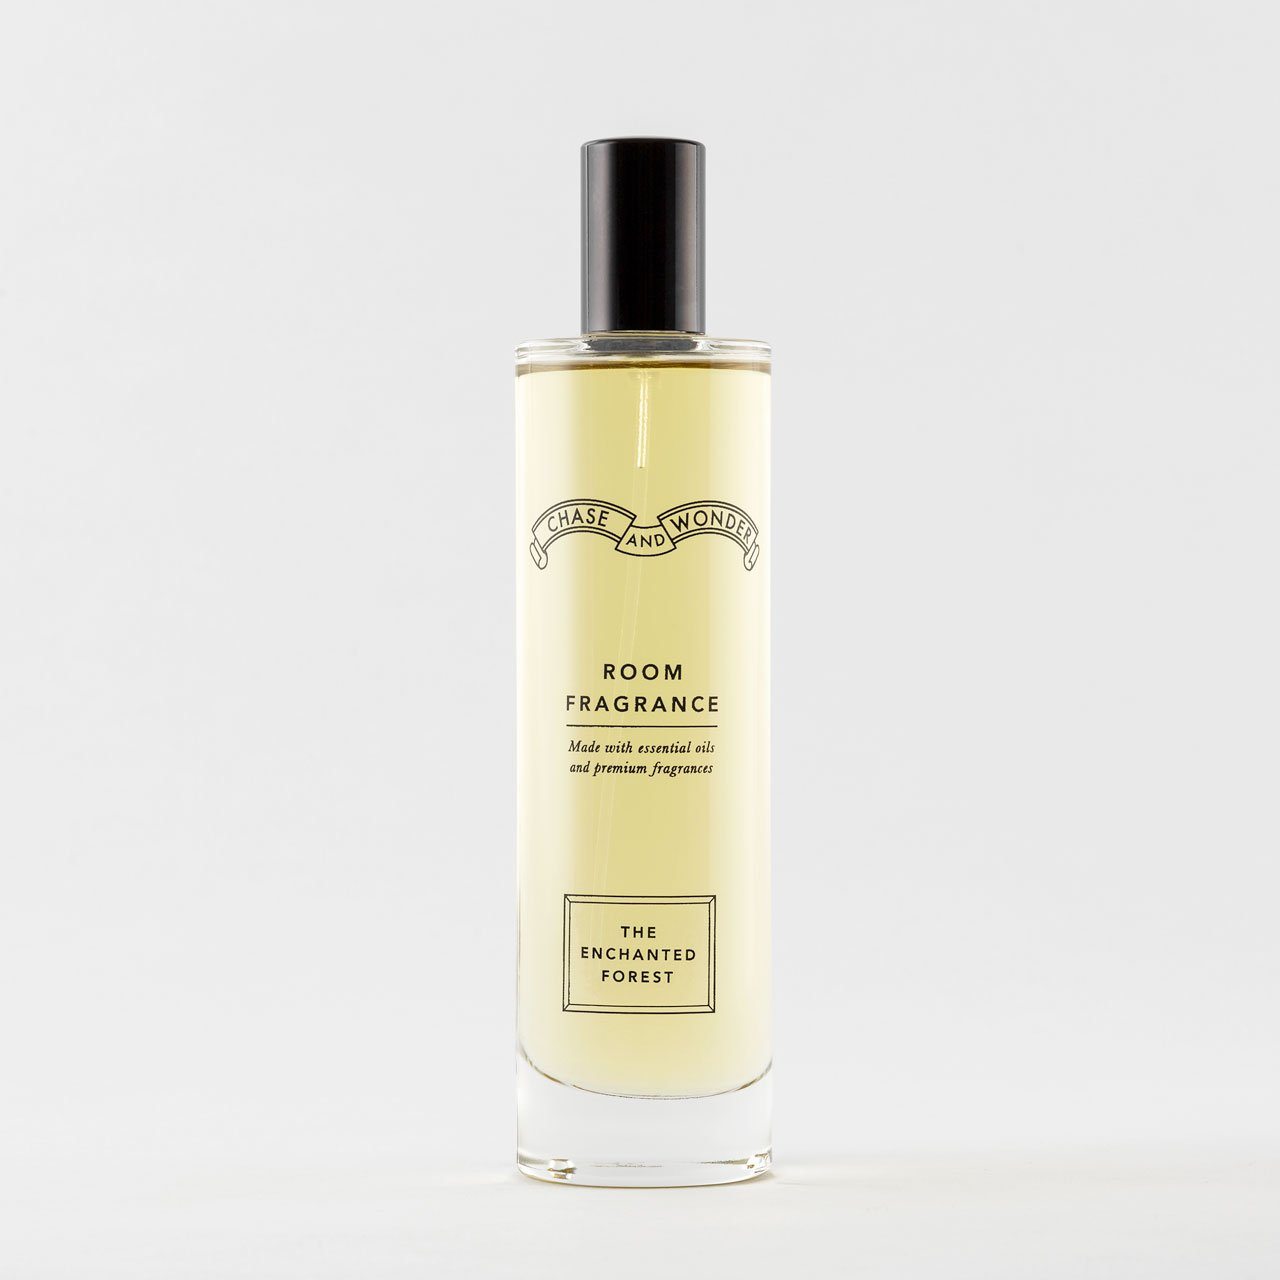 The Enchanted Forest Room Fragrance